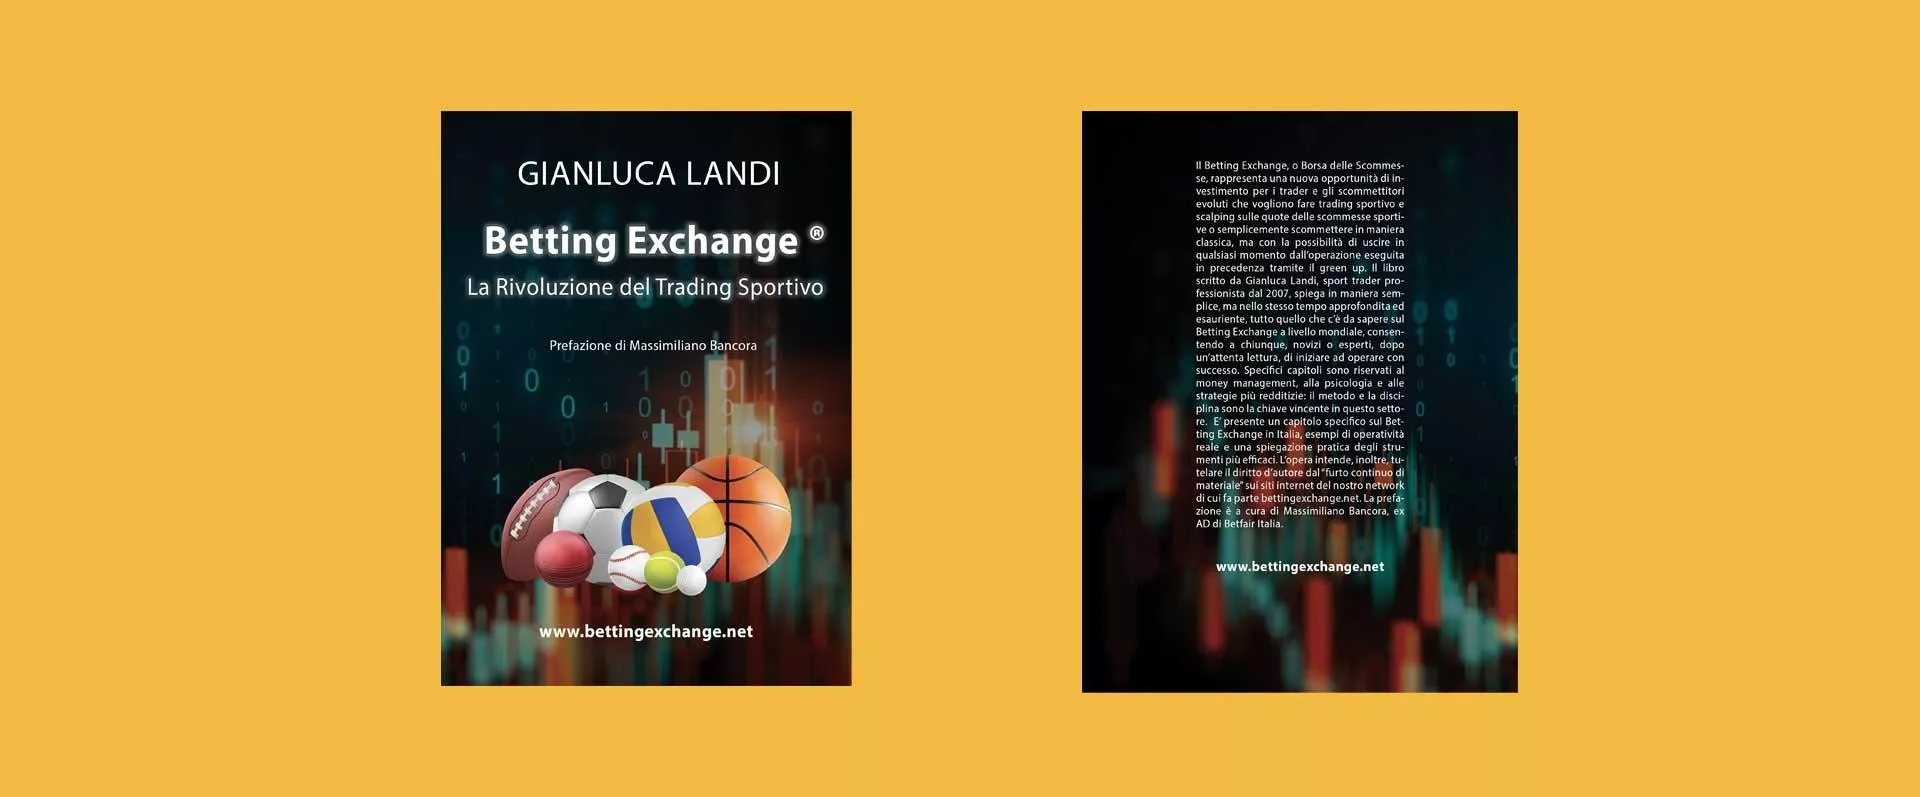 libro betting exchnage trading sportivo